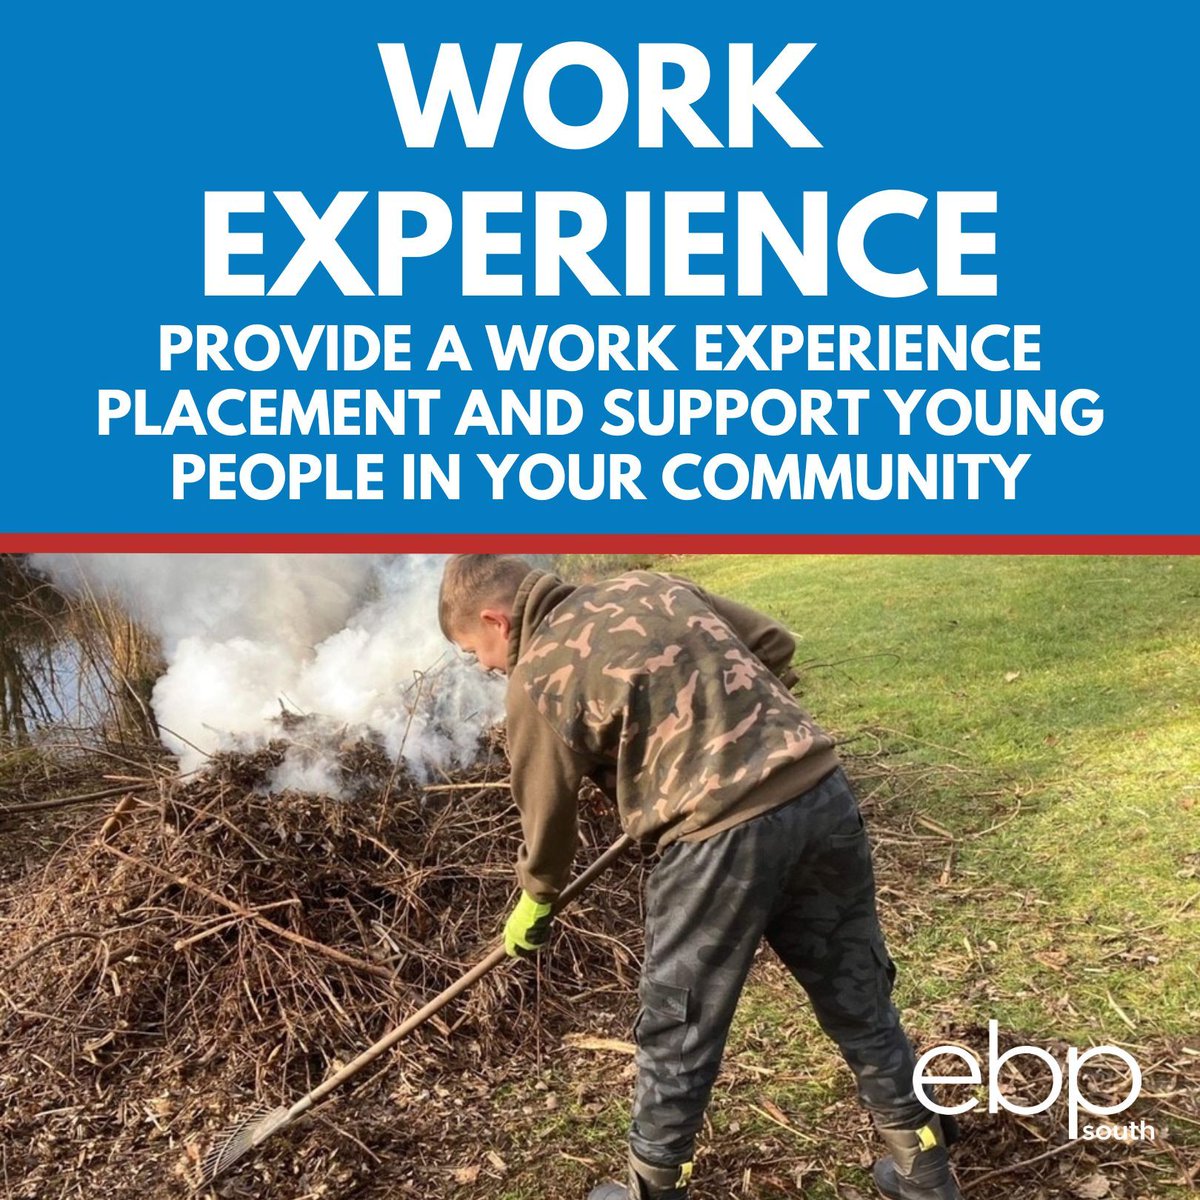 Providing a Work Experience Placement is a great way to support young people whilst bringing new ideas and skills to your business. If your business could provide this vital opportunity for a young person email workexperience@ebpsouth.co.uk. #workexperience #careers